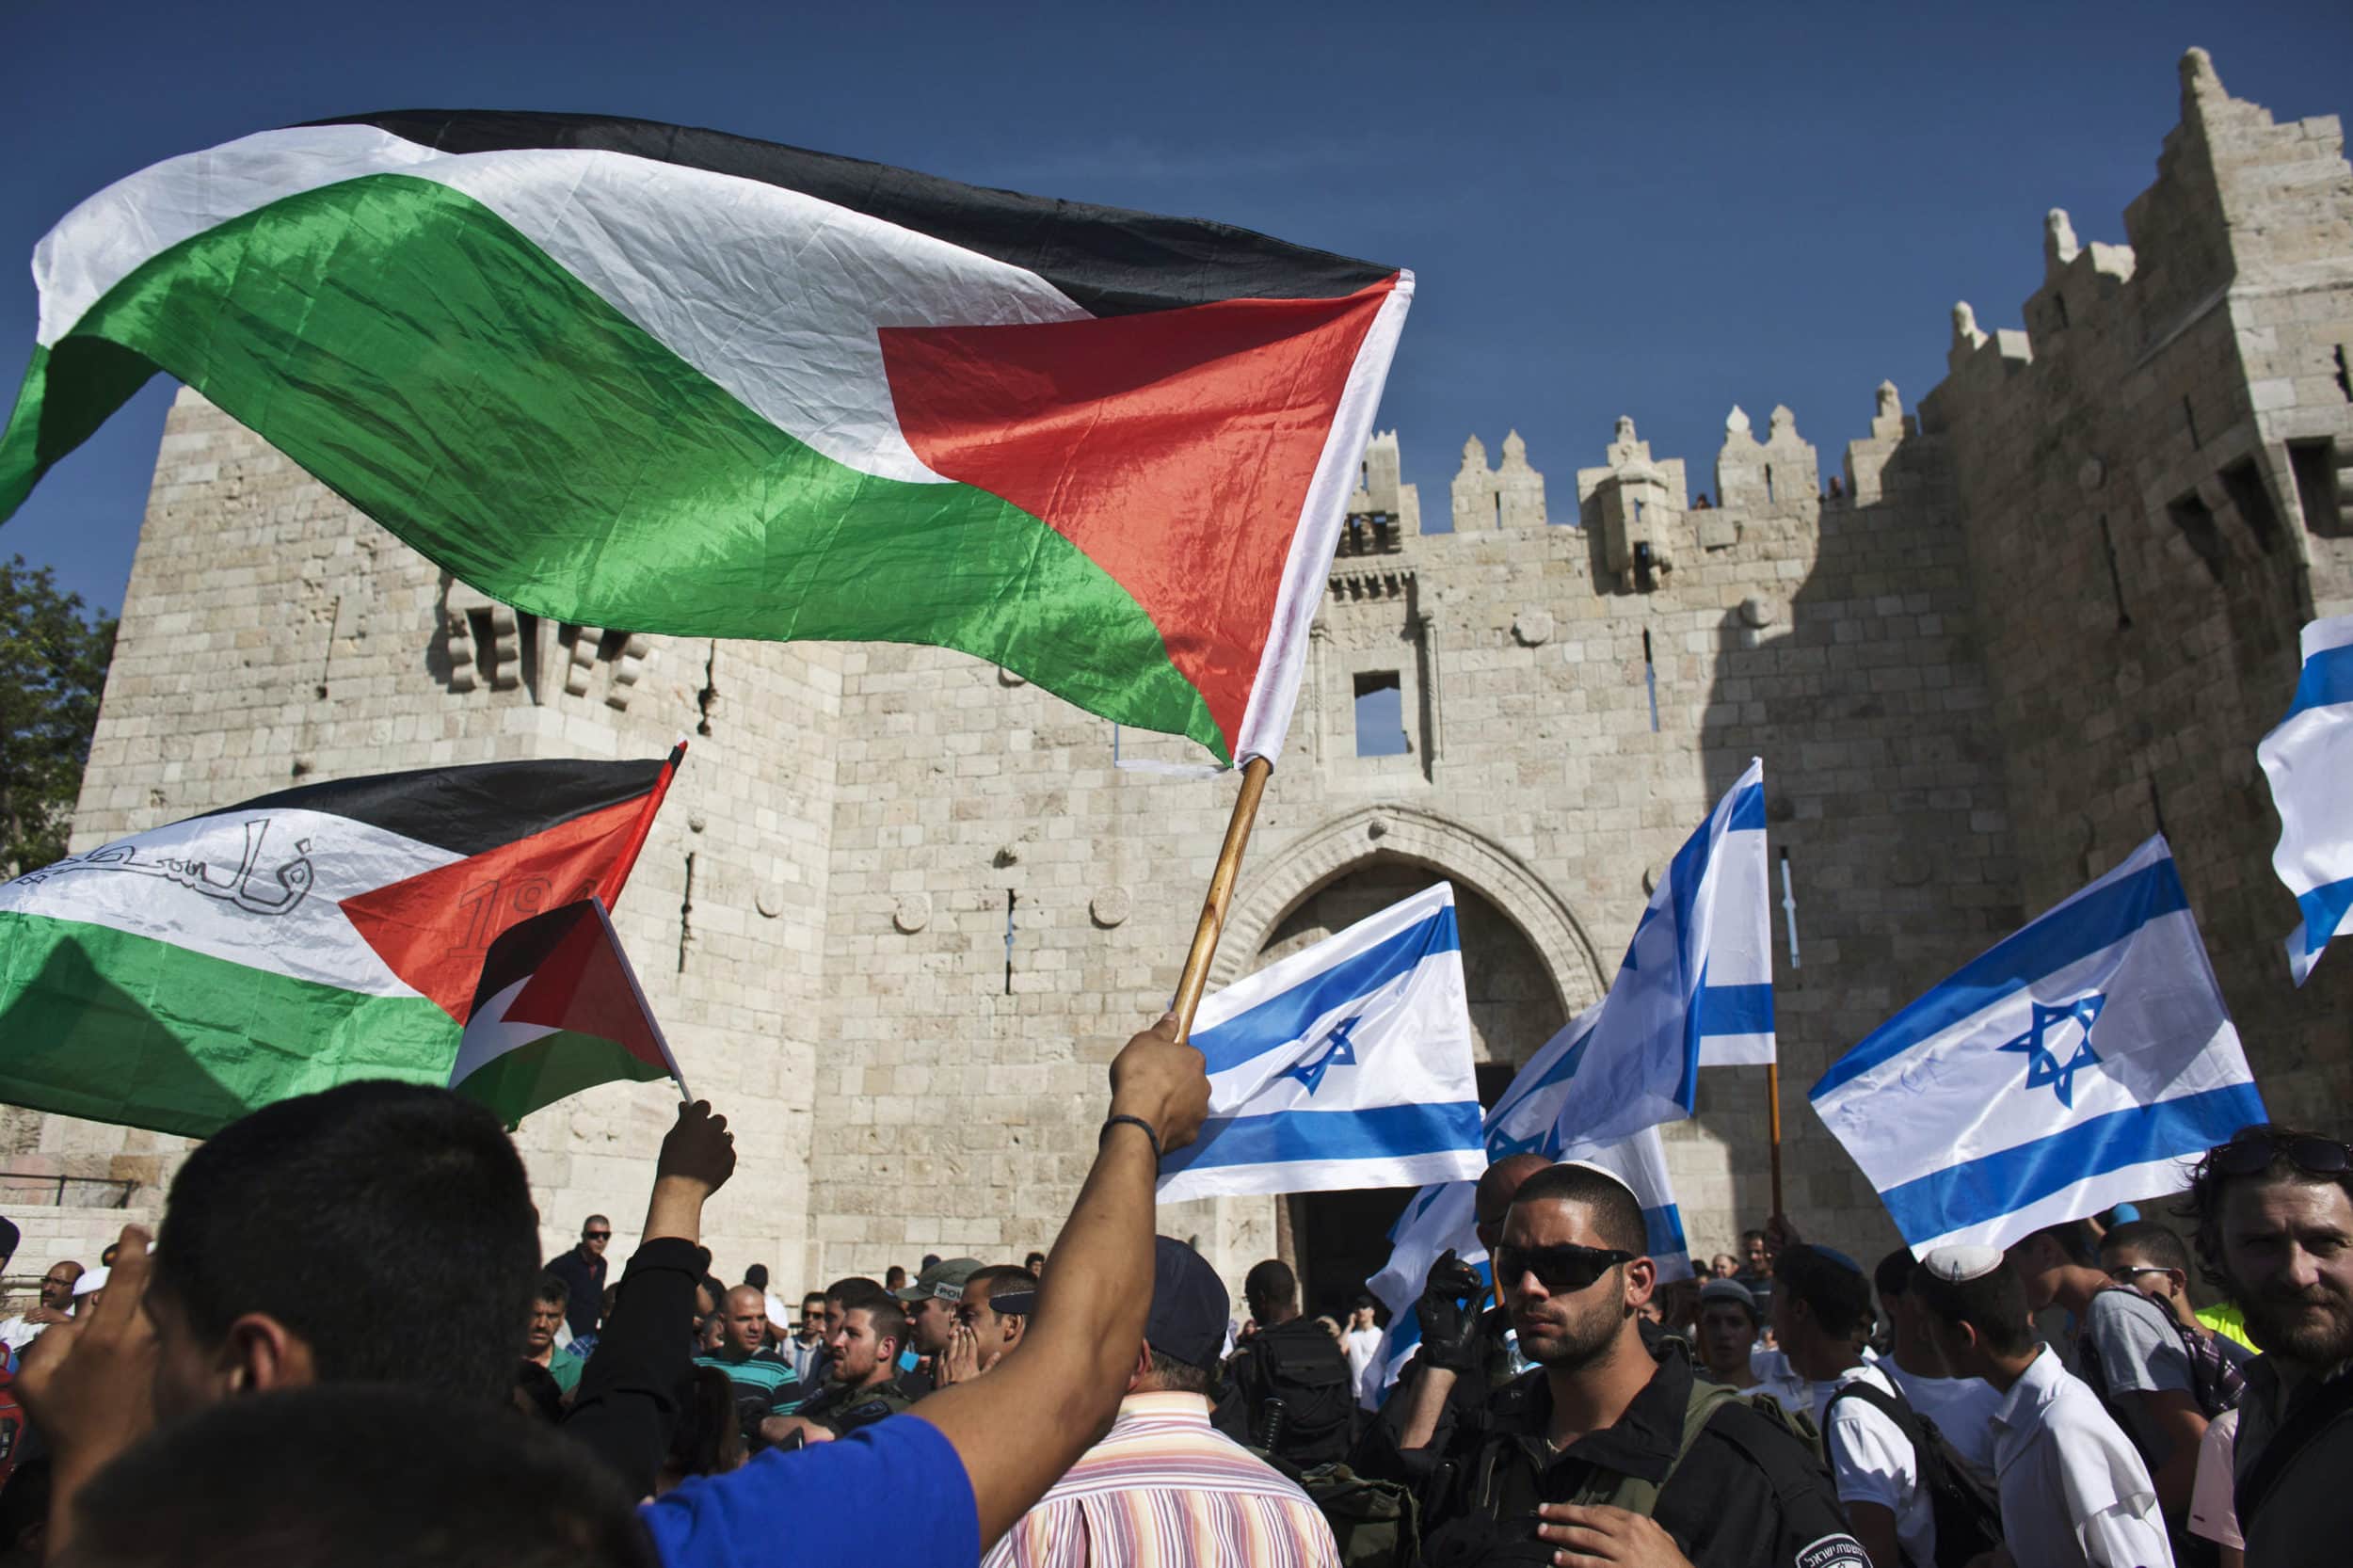 Palestinian protesters wave Palestinian flags as Israelis carrying Israeli flags walk past outside Jerusalem's Old City during a parade marking Jerusalem Day